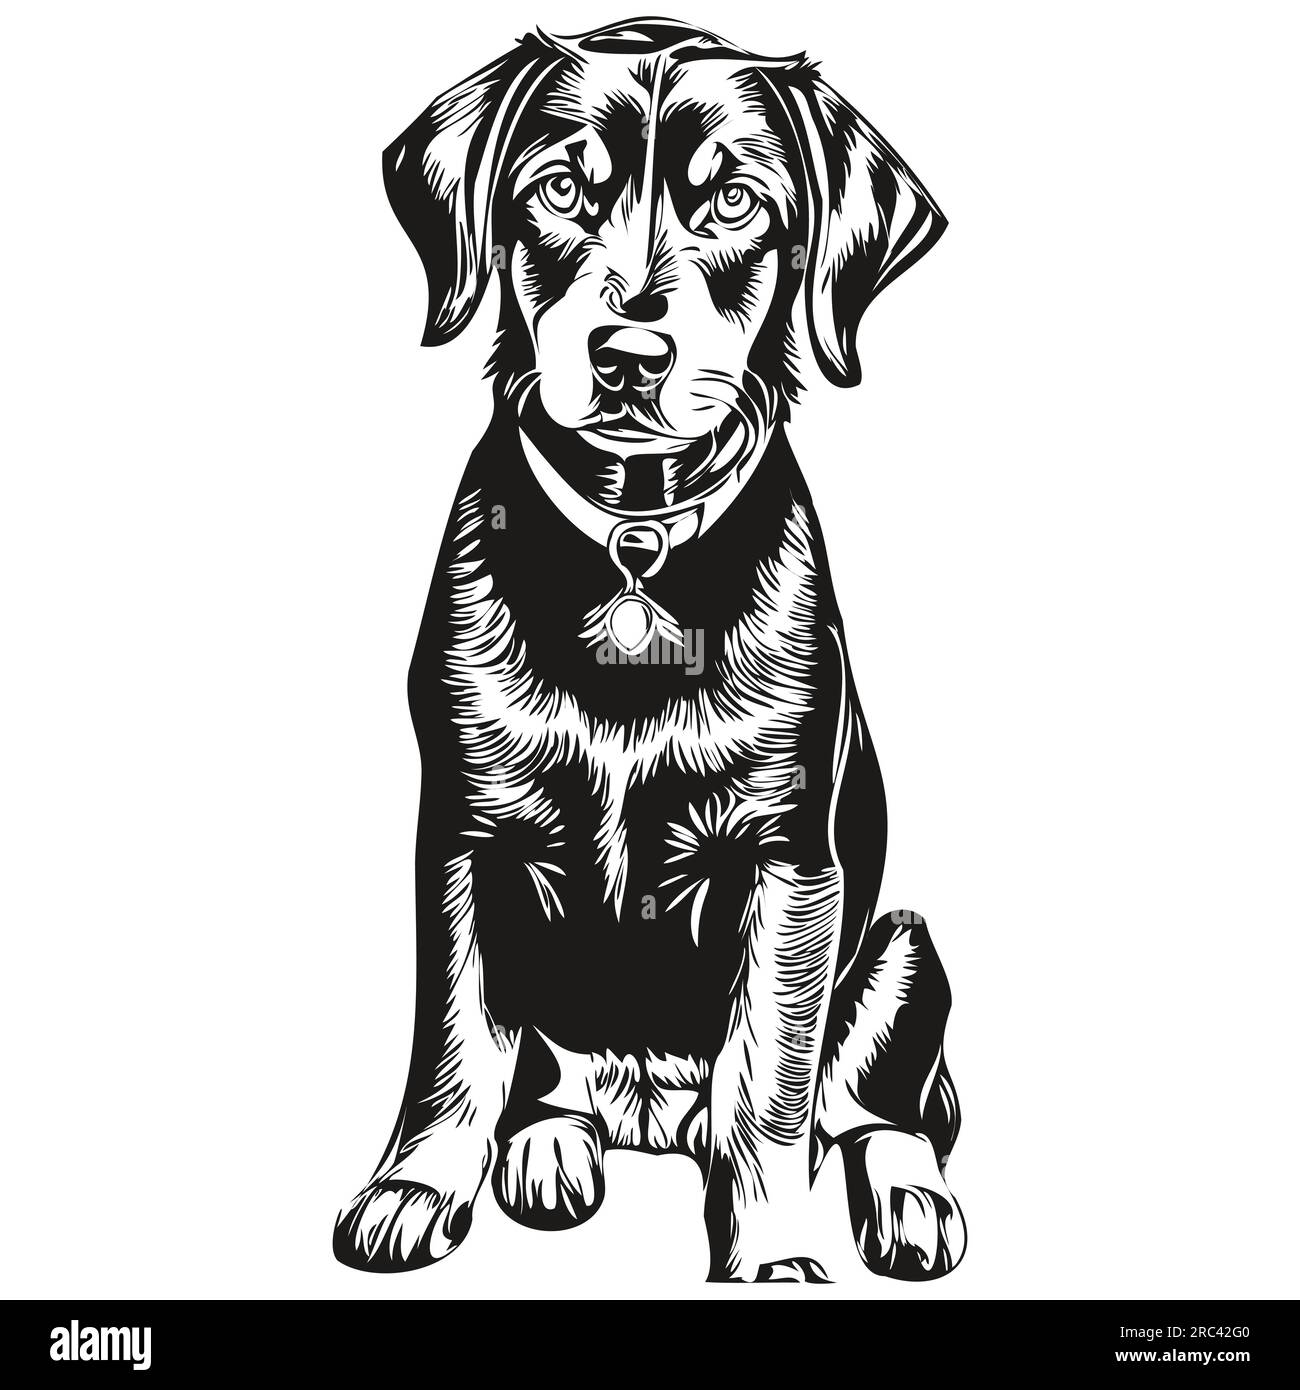 Black and Tan Coonhound dog logo vector black and white, vintage cute dog head engraved Stock Vector